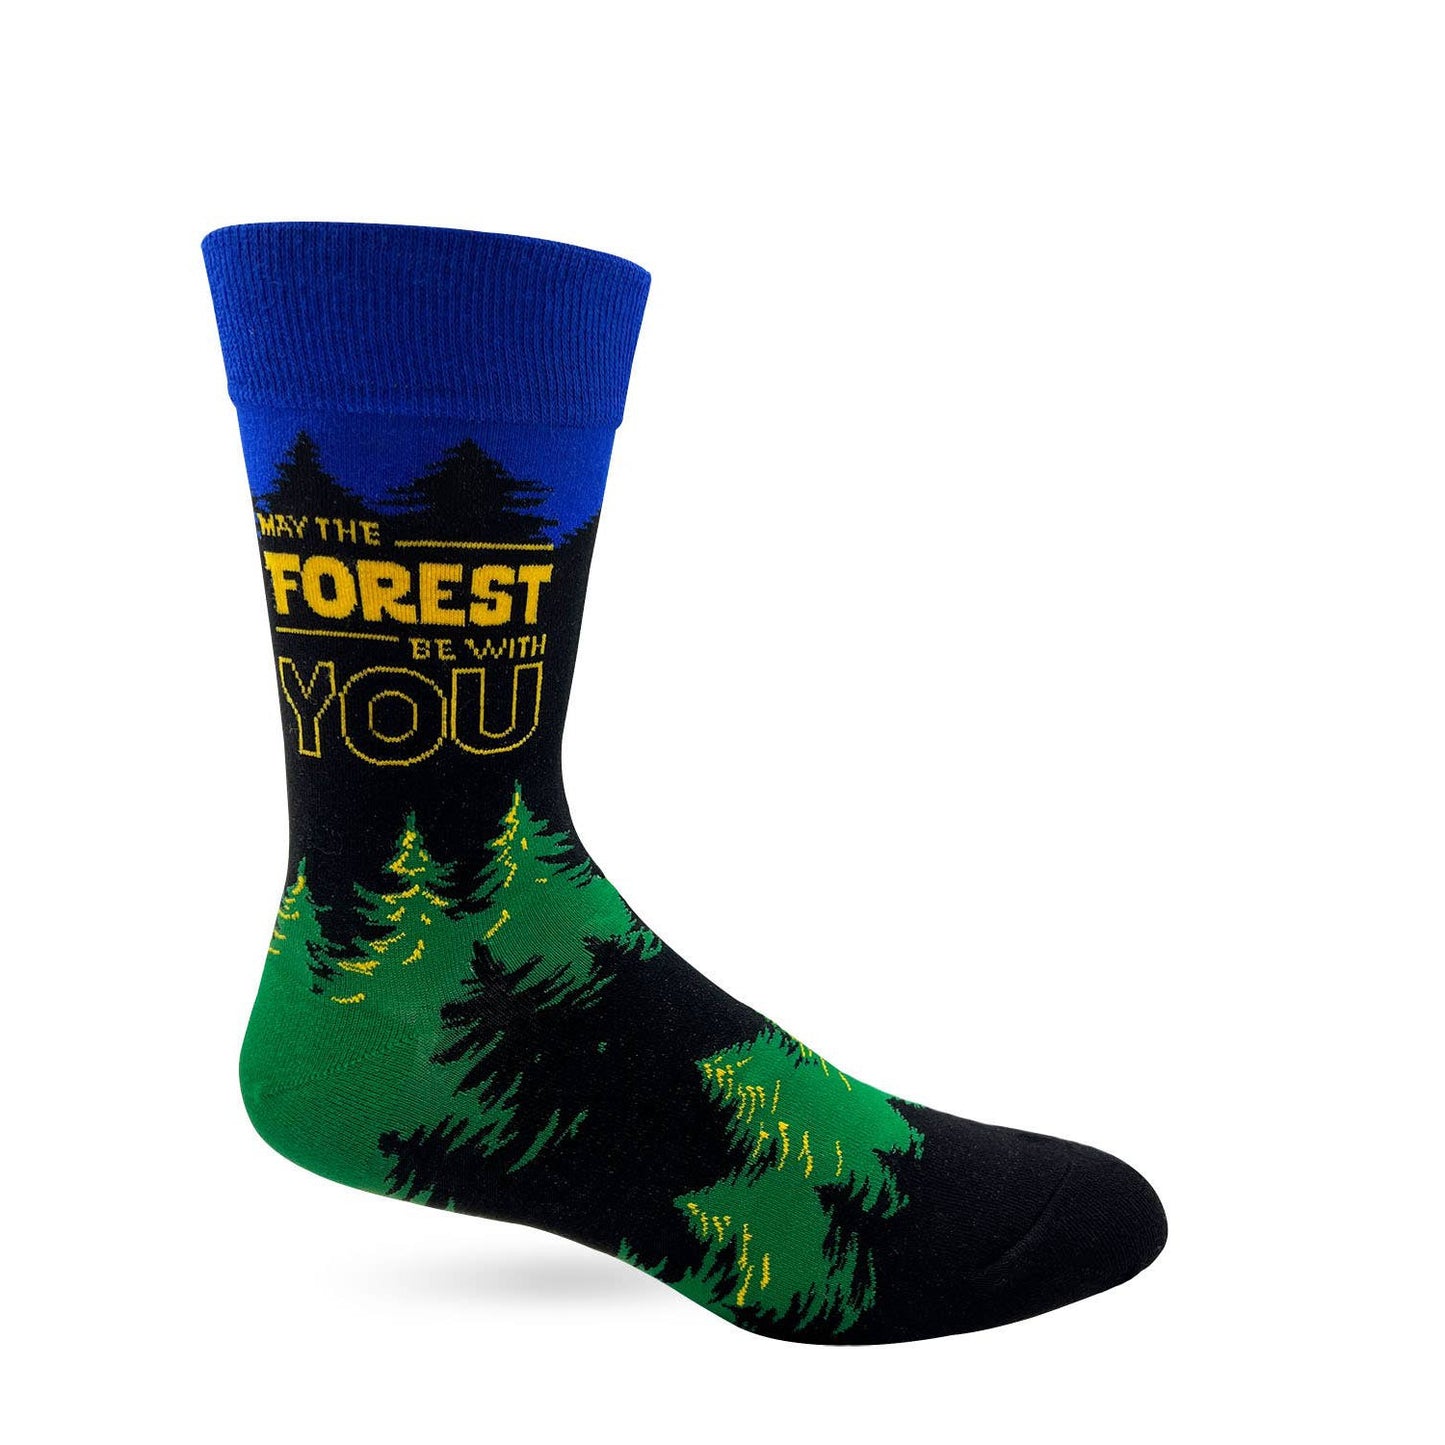 May The Forest Be With You Men's Novelty Crew Socks | Funny Sayings Comfy Socks